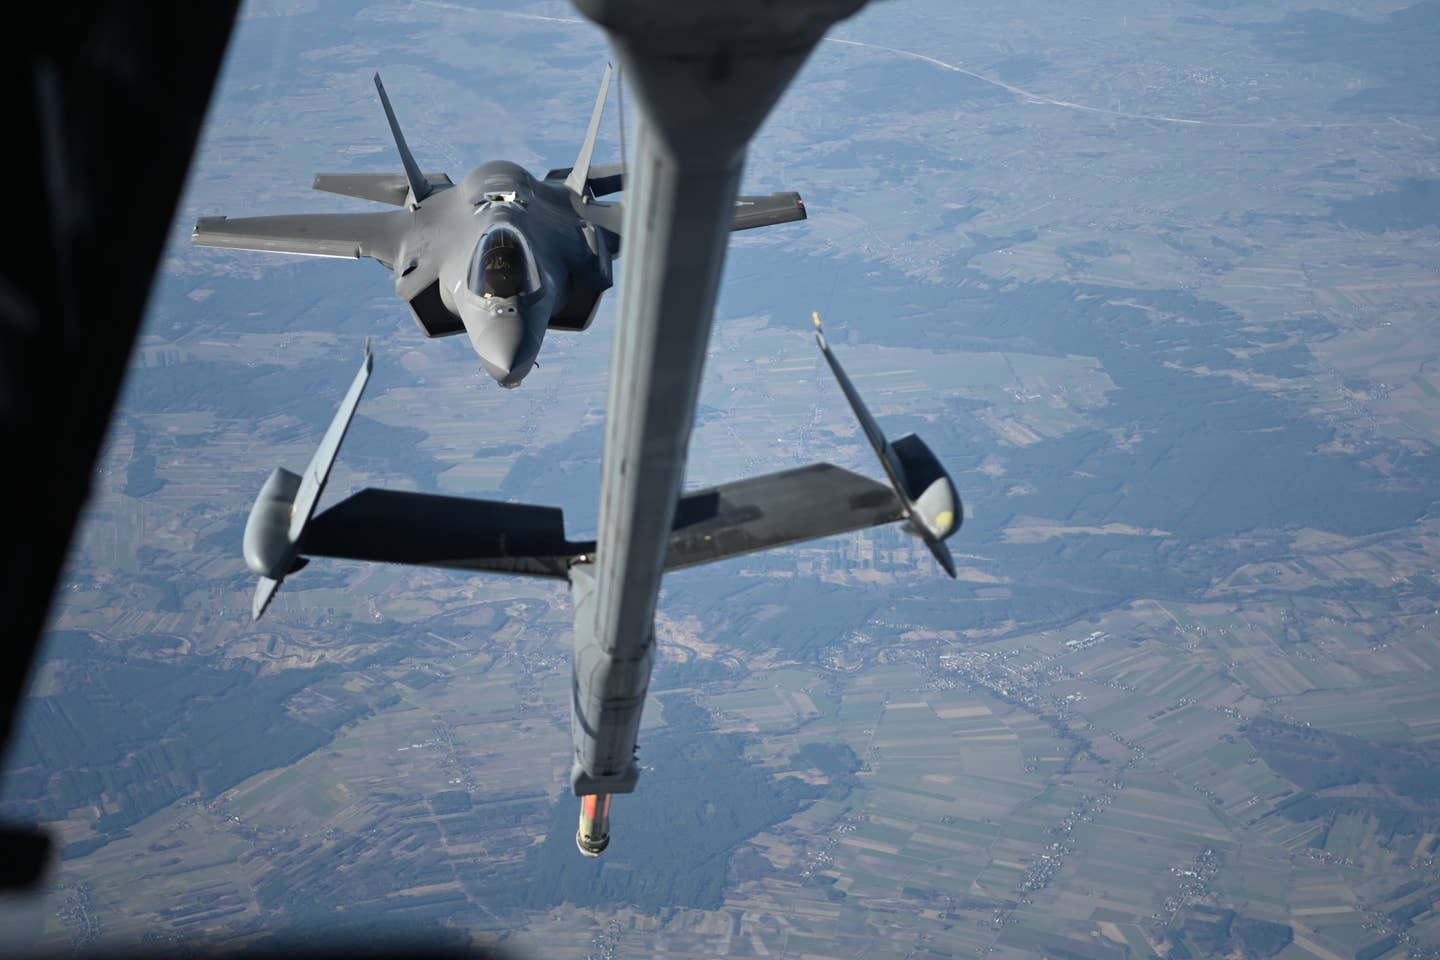 A U.S. Air Force F-35 assigned to the 34th Fighter Squadron approaches a KC-10 Extender to receive fuel over Poland, February 24, 2022. The F-35, originally from Hill Air Force Base, Utah, was forward deployed to NATO’s eastern flank to support NATO’s Enhanced Air Policing mission. <em>U.S. Air Force photo by Senior Airman Joseph Barron</em>